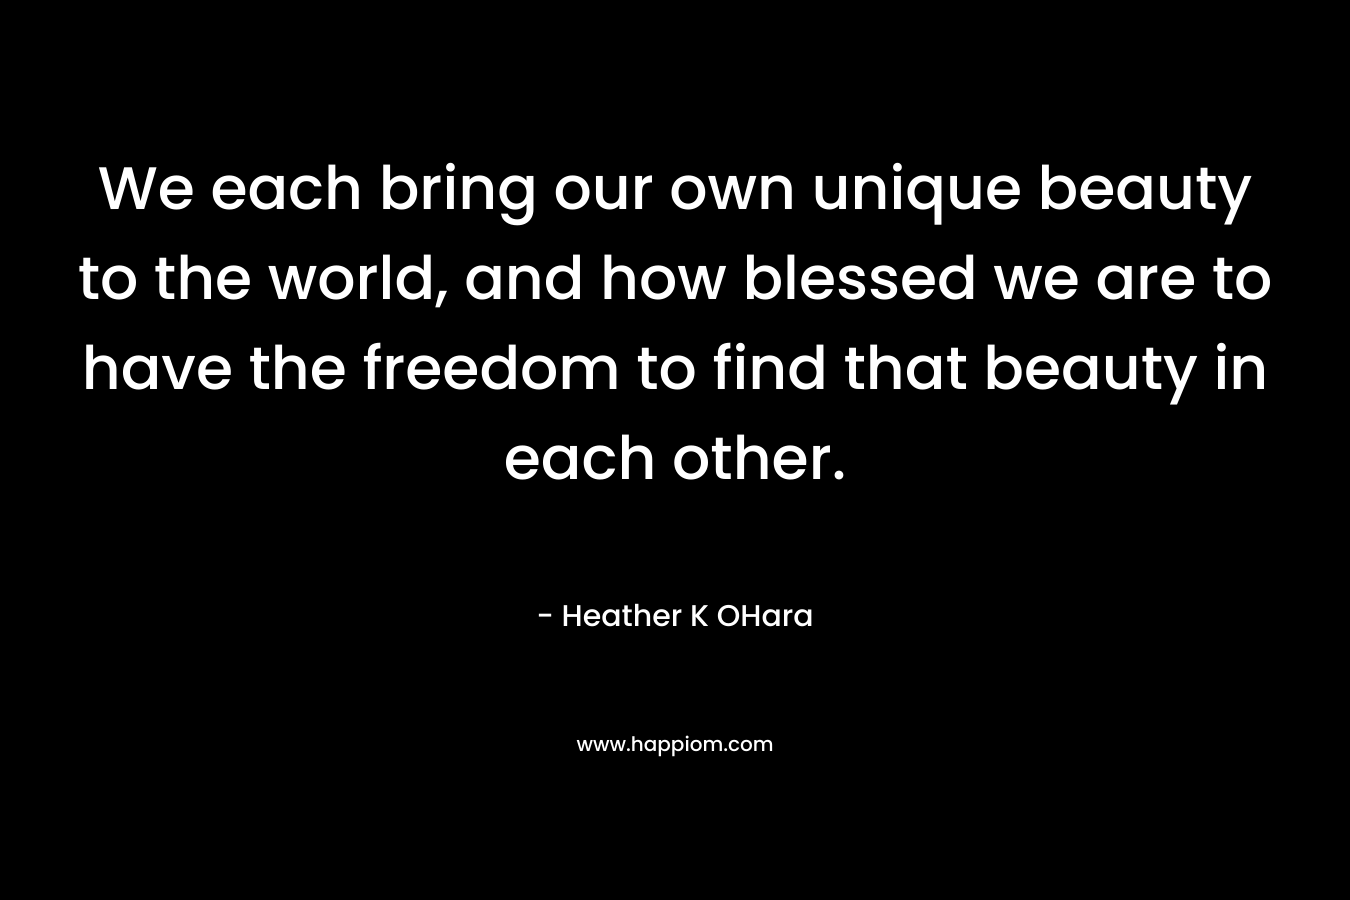 We each bring our own unique beauty to the world, and how blessed we are to have the freedom to find that beauty in each other. – Heather K OHara